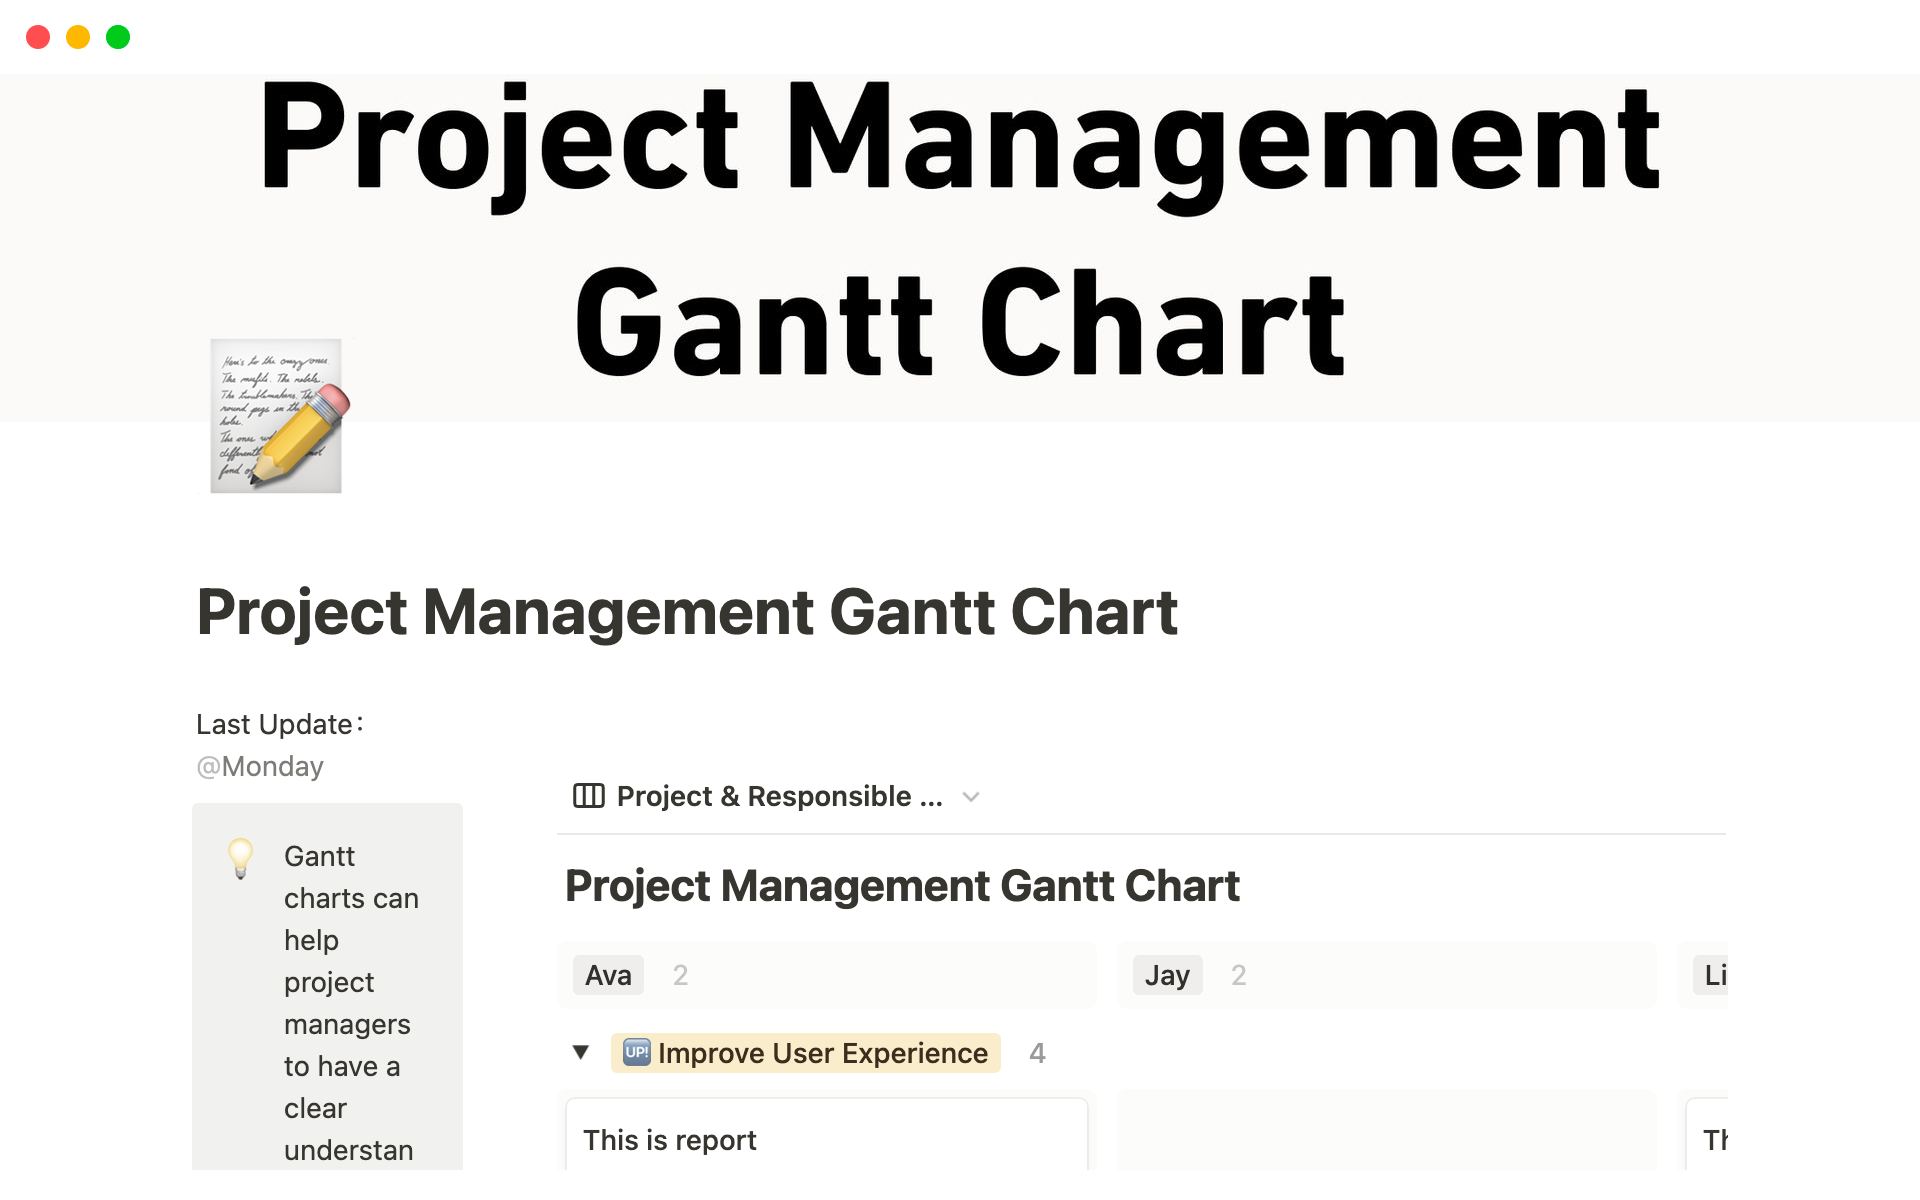 A Gantt chart in project management provides a visual representation of project progress and task breakdown, improving project efficiency and shortening project duration.